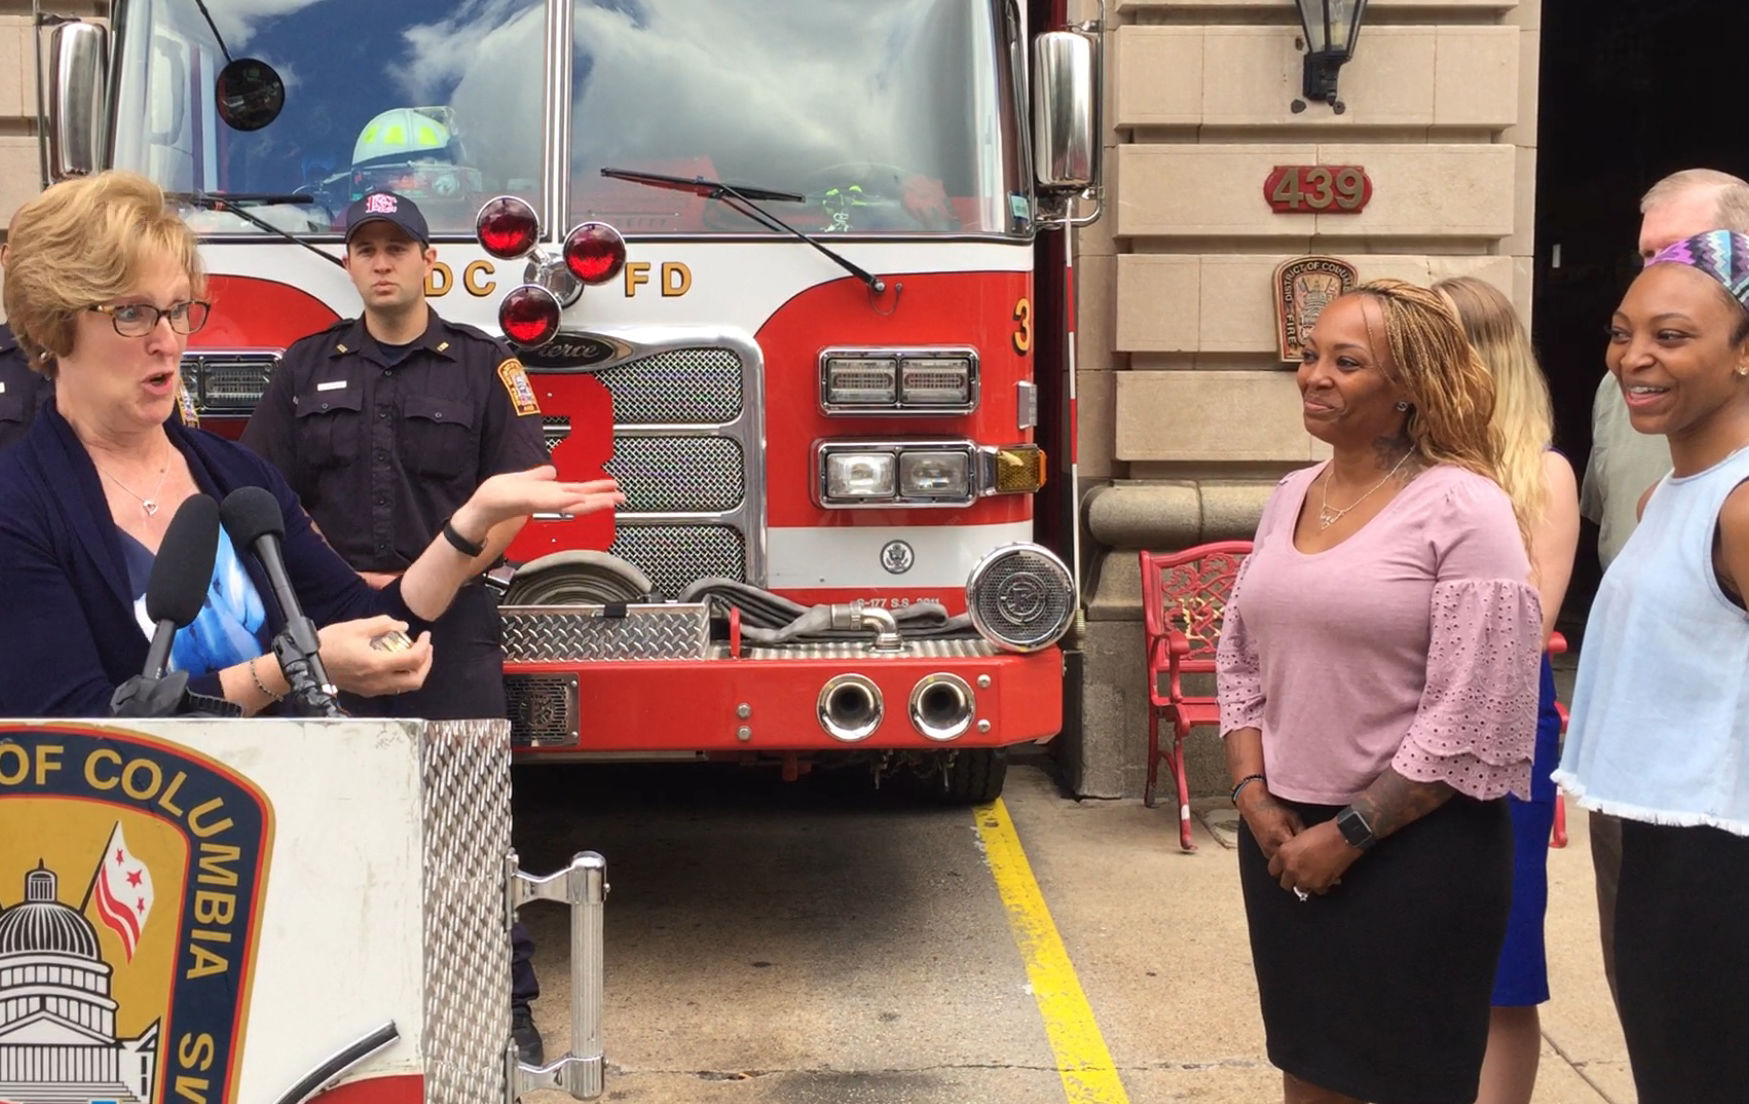 ictoria Wolf told Tawana Murphy-Watkins and Murphy-Watkins' daughter, Anfeni Carroll, that it still seems unreal to her how "unbelievably lucky" she was to have an off-duty trained professional on hand to begin early live-saving measures. (WTOP/Kristi King)